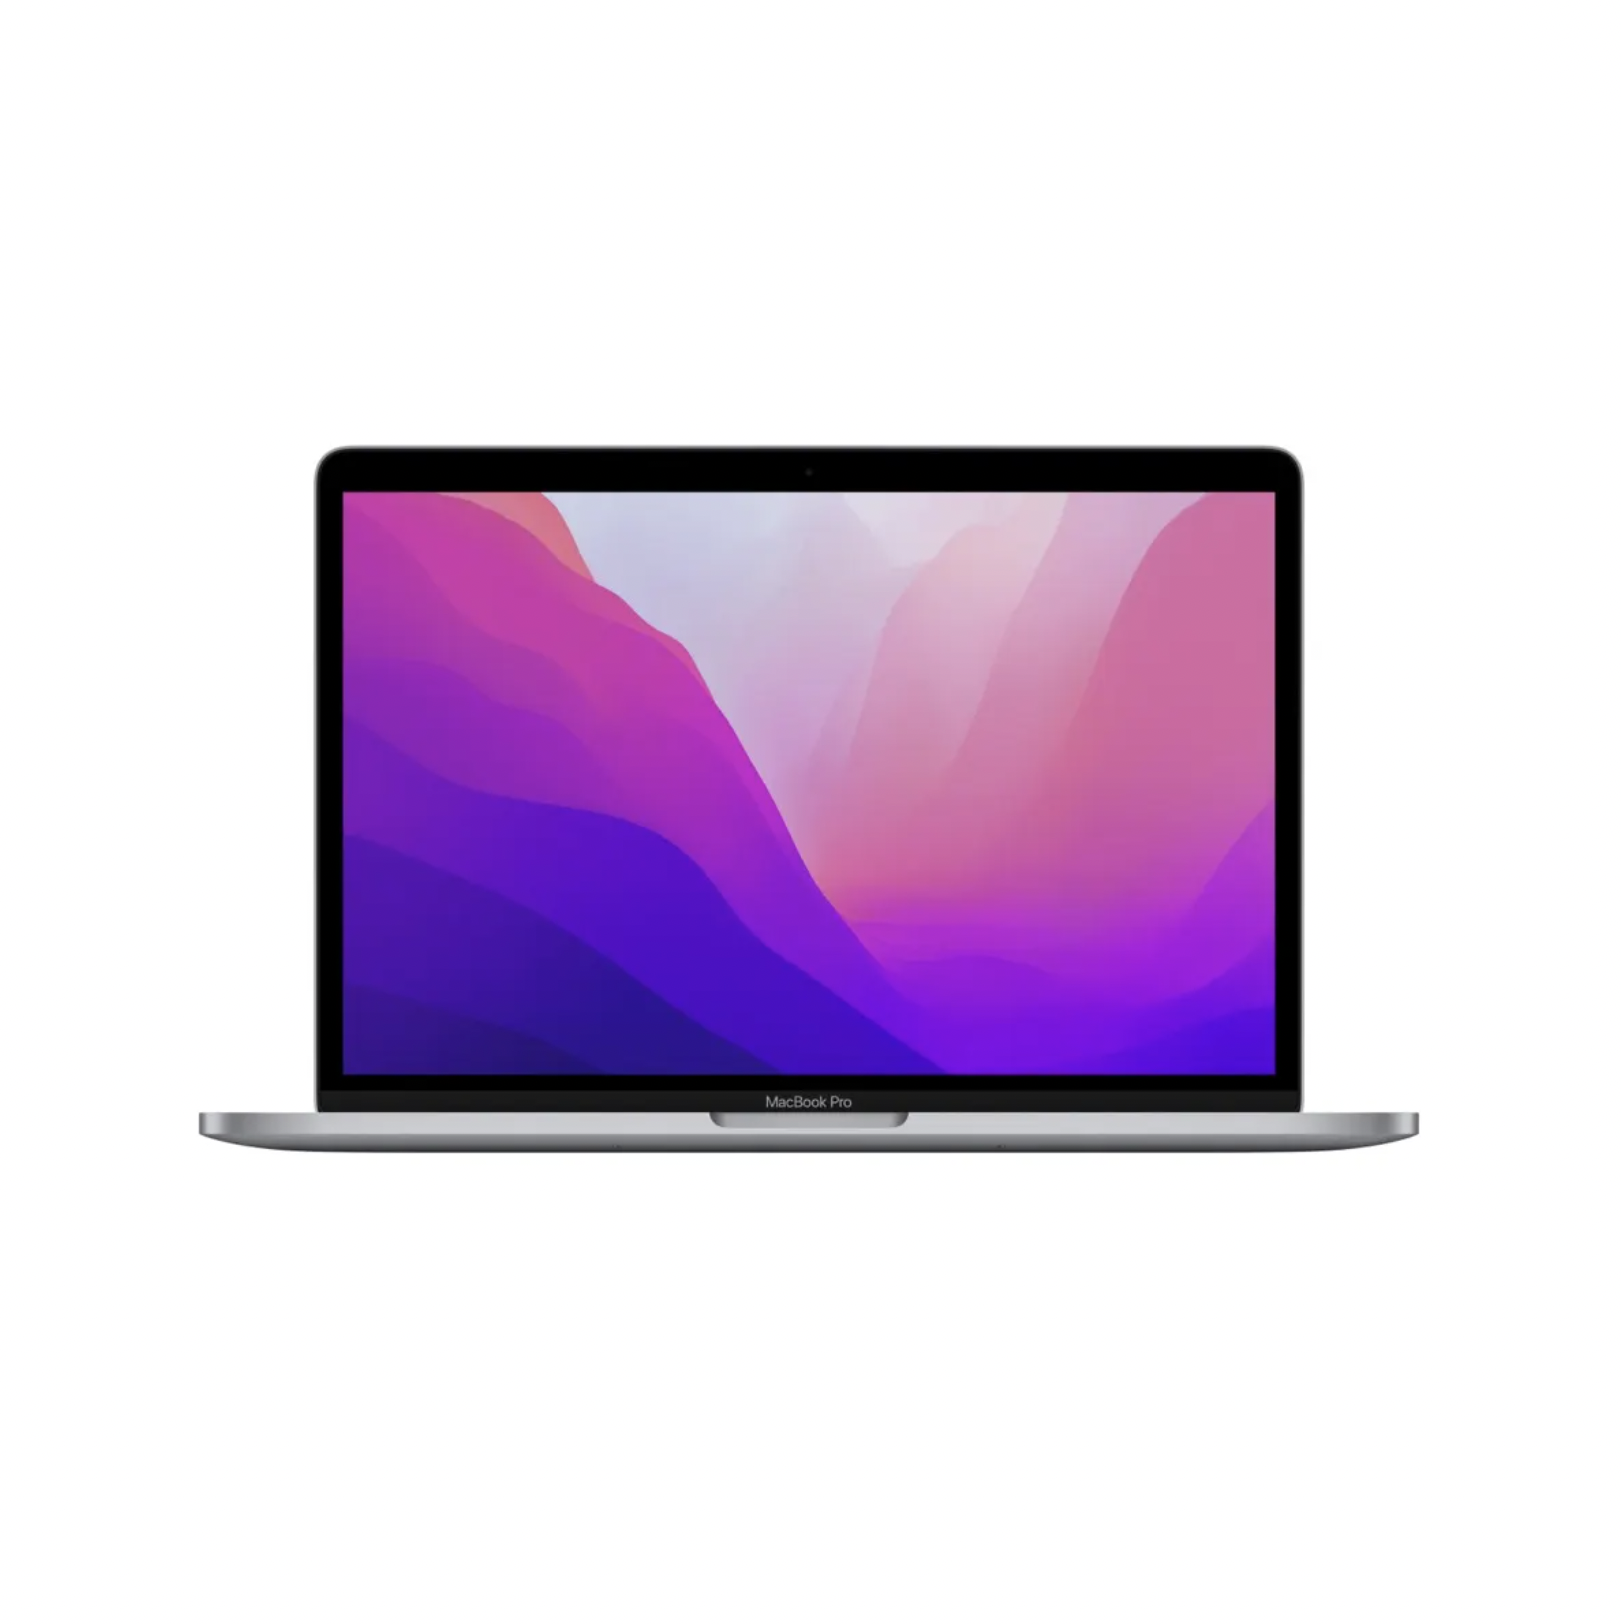  Apple 2022 MacBook Pro Laptop with M2 chip: 13-inch Retina  Display, 8GB RAM, 256GB ​​​​​​​SSD ​​​​​​​Storage, Touch Bar, Backlit  Keyboard, FaceTime HD Camera. Works with iPhone and iPad; Silver :  Electronics